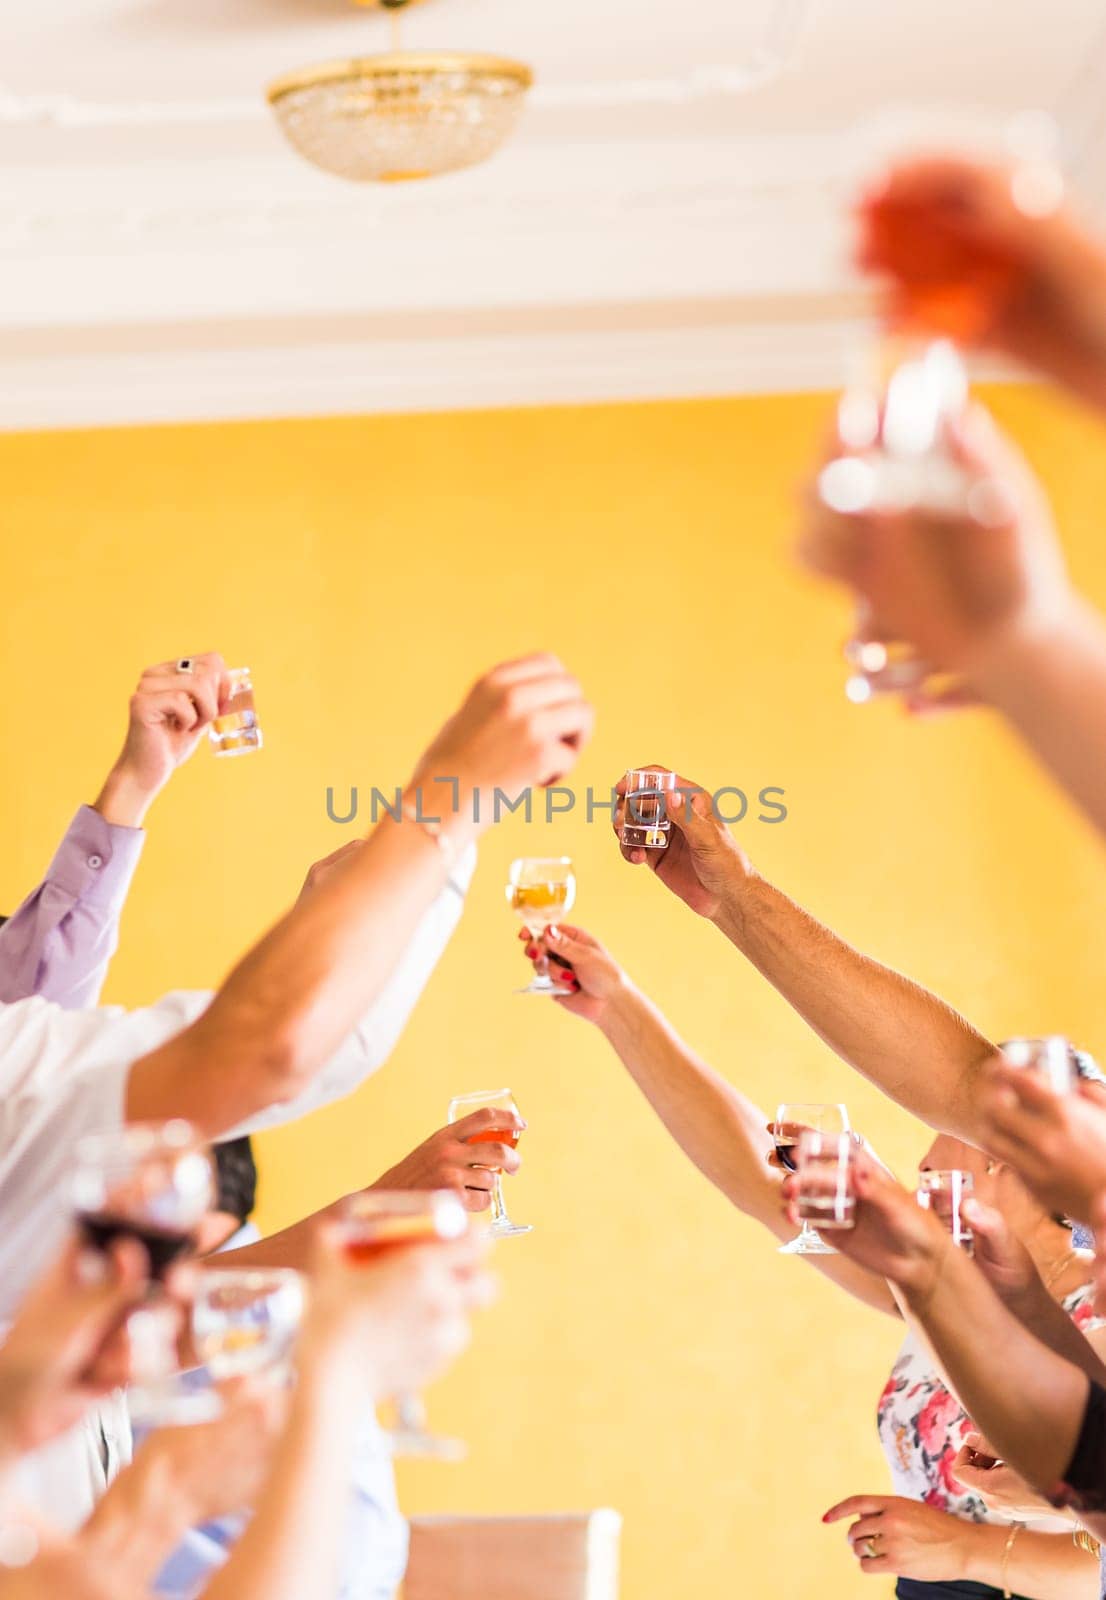 Celebration. Hands holding the glasses of champagne and wine making a toast by Satura86